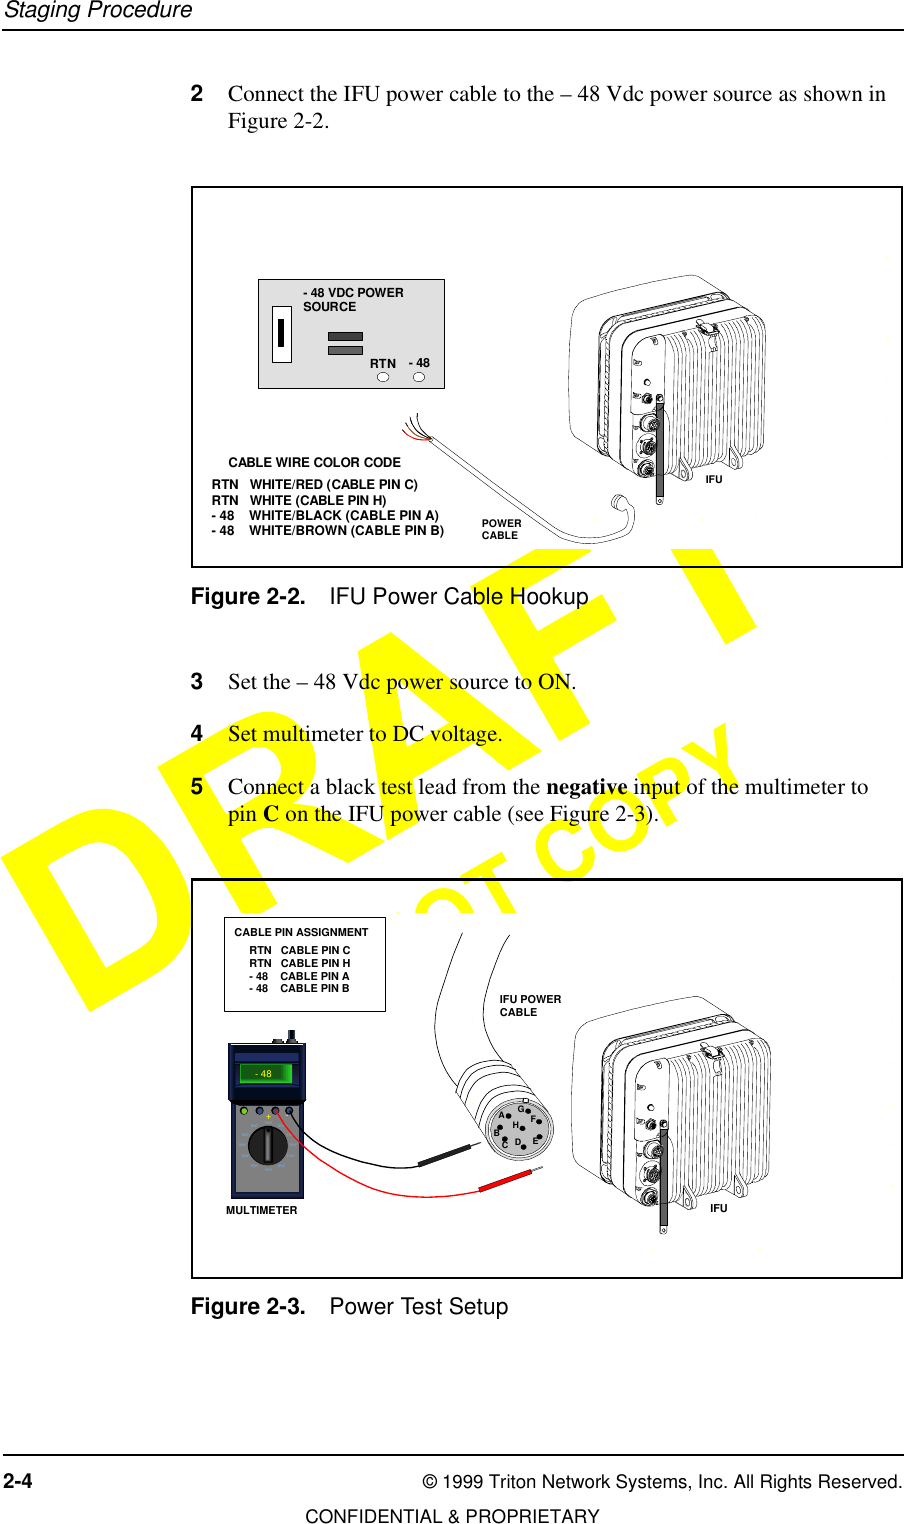 Staging Procedure2-4 © 1999 Triton Network Systems, Inc. All Rights Reserved.CONFIDENTIAL &amp; PROPRIETARYDO NOT COPY2Connect the IFU power cable to the – 48 Vdc power source as shown in Figure 2-2.Figure 2-2. IFU Power Cable Hookup3Set the – 48 Vdc power source to ON. 4Set multimeter to DC voltage.5Connect a black test lead from the negative input of the multimeter to pin C on the IFU power cable (see Figure 2-3).Figure 2-3. Power Test Setup34567DCBEFGIFUPOWERCABLE- 48 VDC POWERSOURCE- 48RTNRTN   WHITE/RED (CABLE PIN C)RTN   WHITE (CABLE PIN H)- 48    WHITE/BLACK (CABLE PIN A)- 48    WHITE/BROWN (CABLE PIN B)CABLE WIRE COLOR CODE34DC567EFDCBEFGTEXTTEXTTEXT TE XTTEXT TE XTTEXT TE XTTEXT TE XTTEXTTEXT- 48+- MULTIMETER IFURTN   CABLE PIN CRTN   CABLE PIN H- 48    CABLE PIN A- 48    CABLE PIN BCABLE PIN ASSIGNMENTIFU POWERCABLEAEDCBHGF